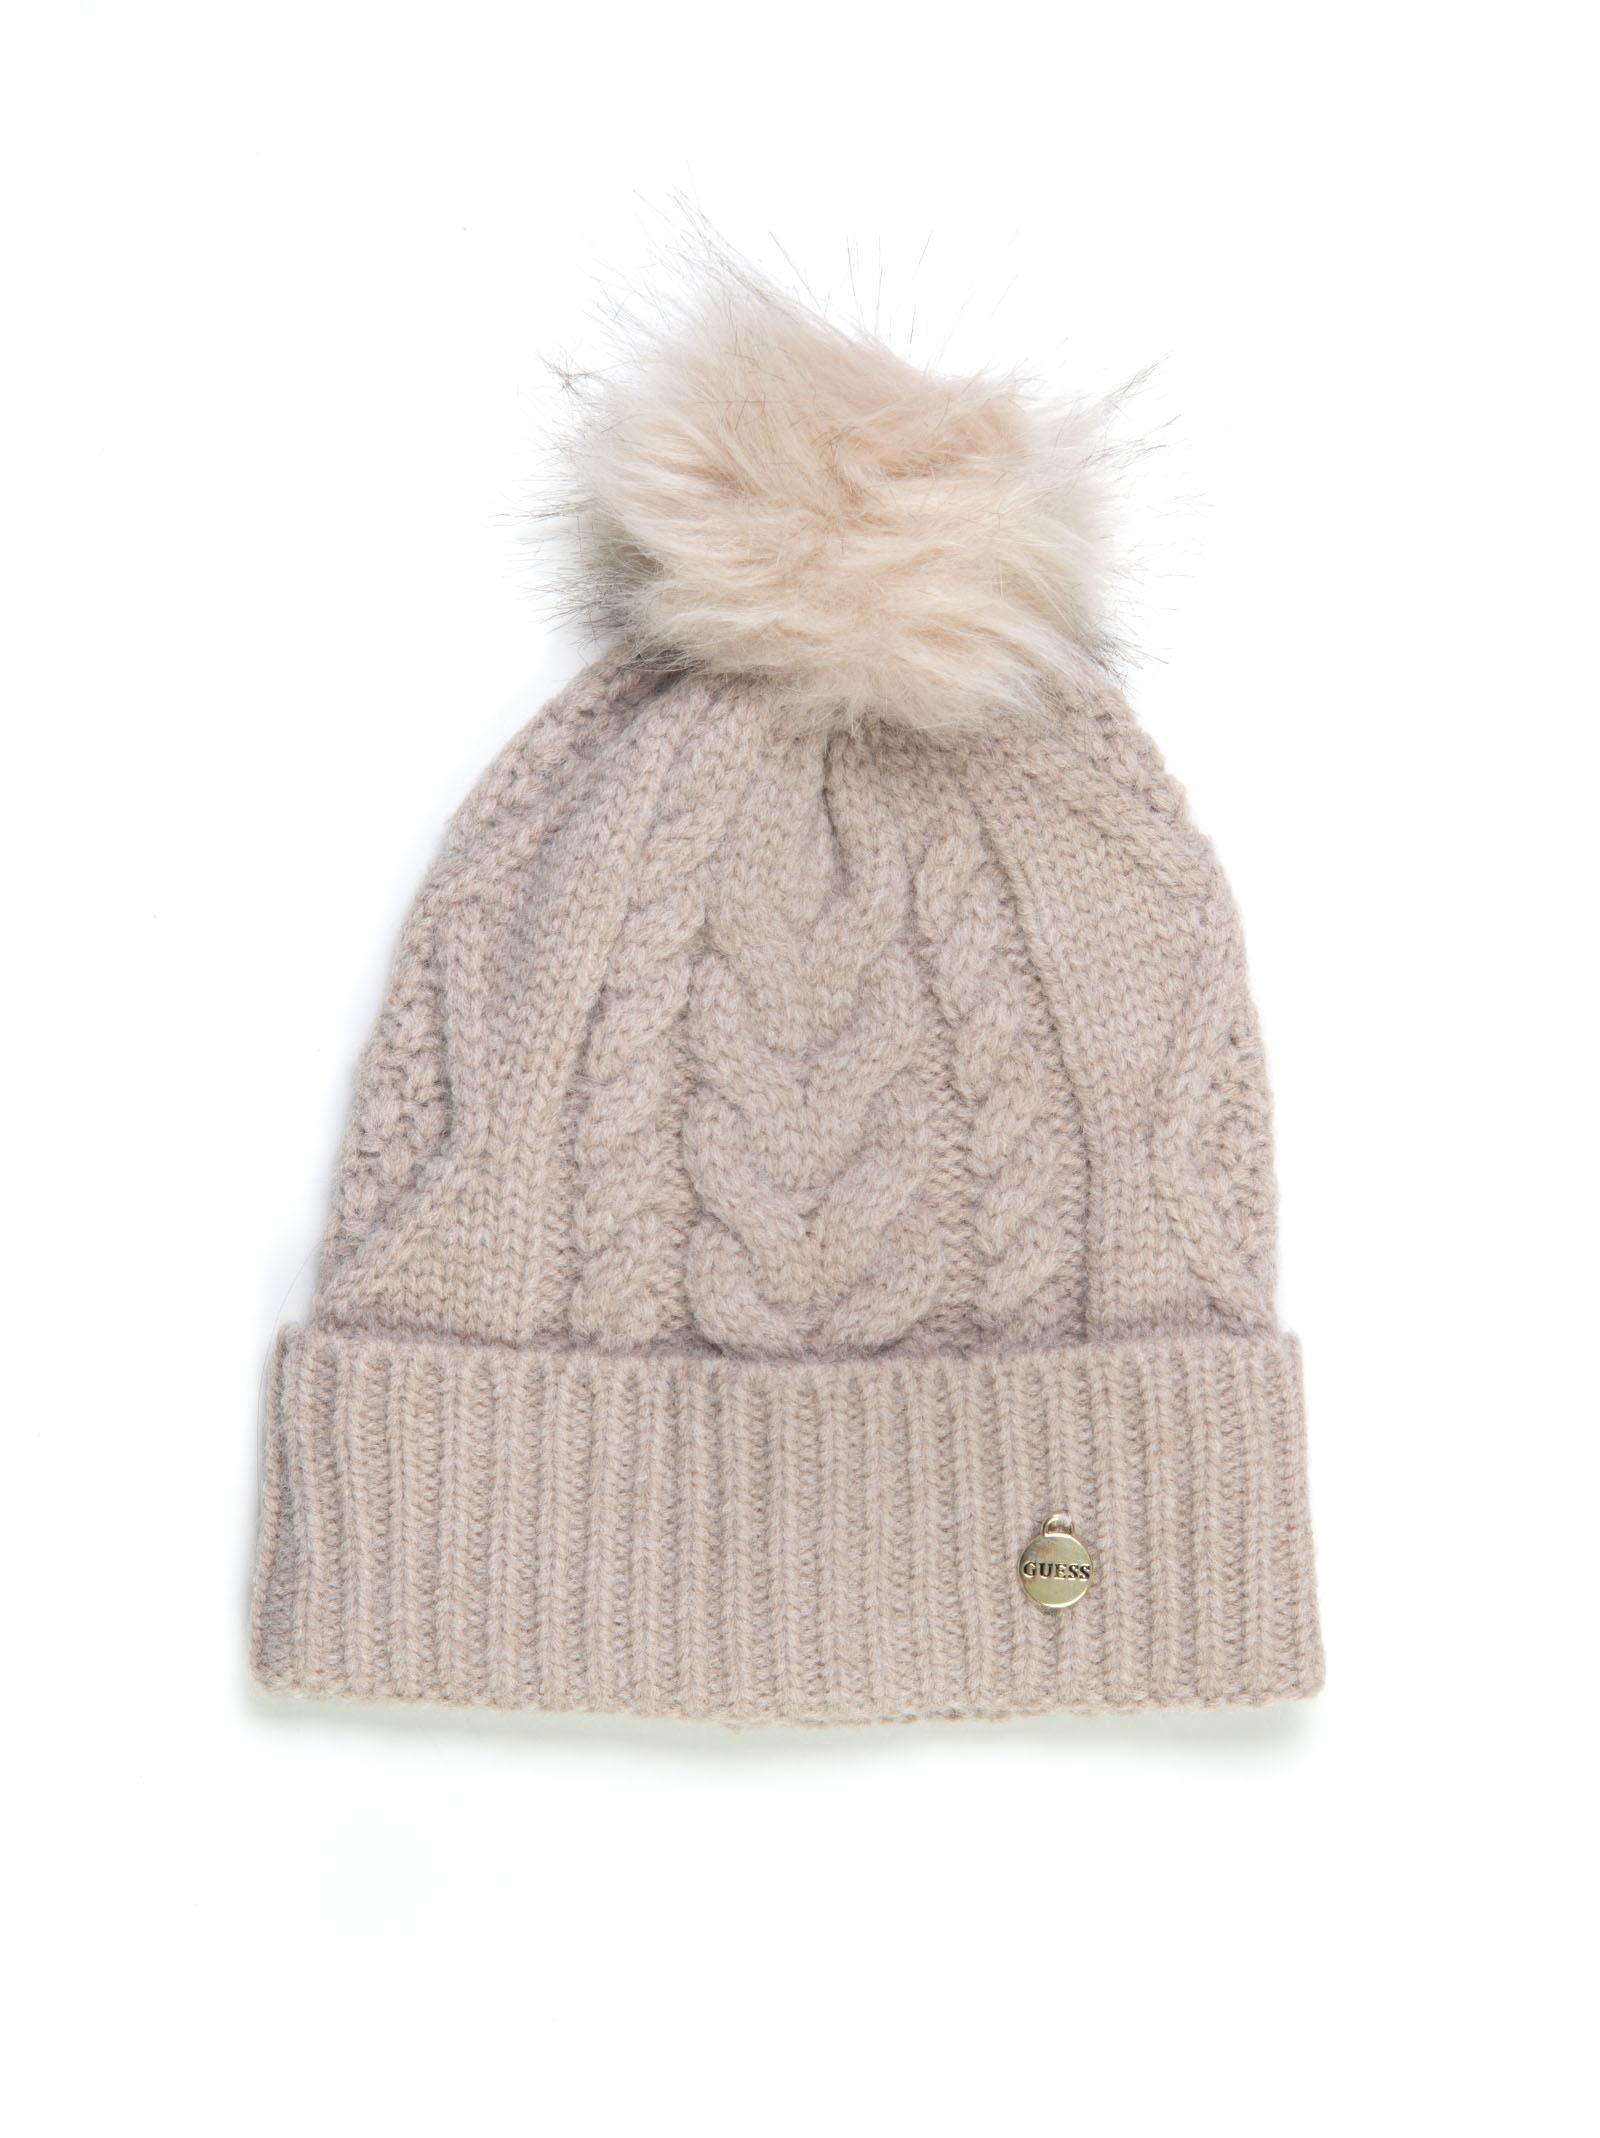 Guess Beanie With Pom Poms Light Grey in Natural | Lyst